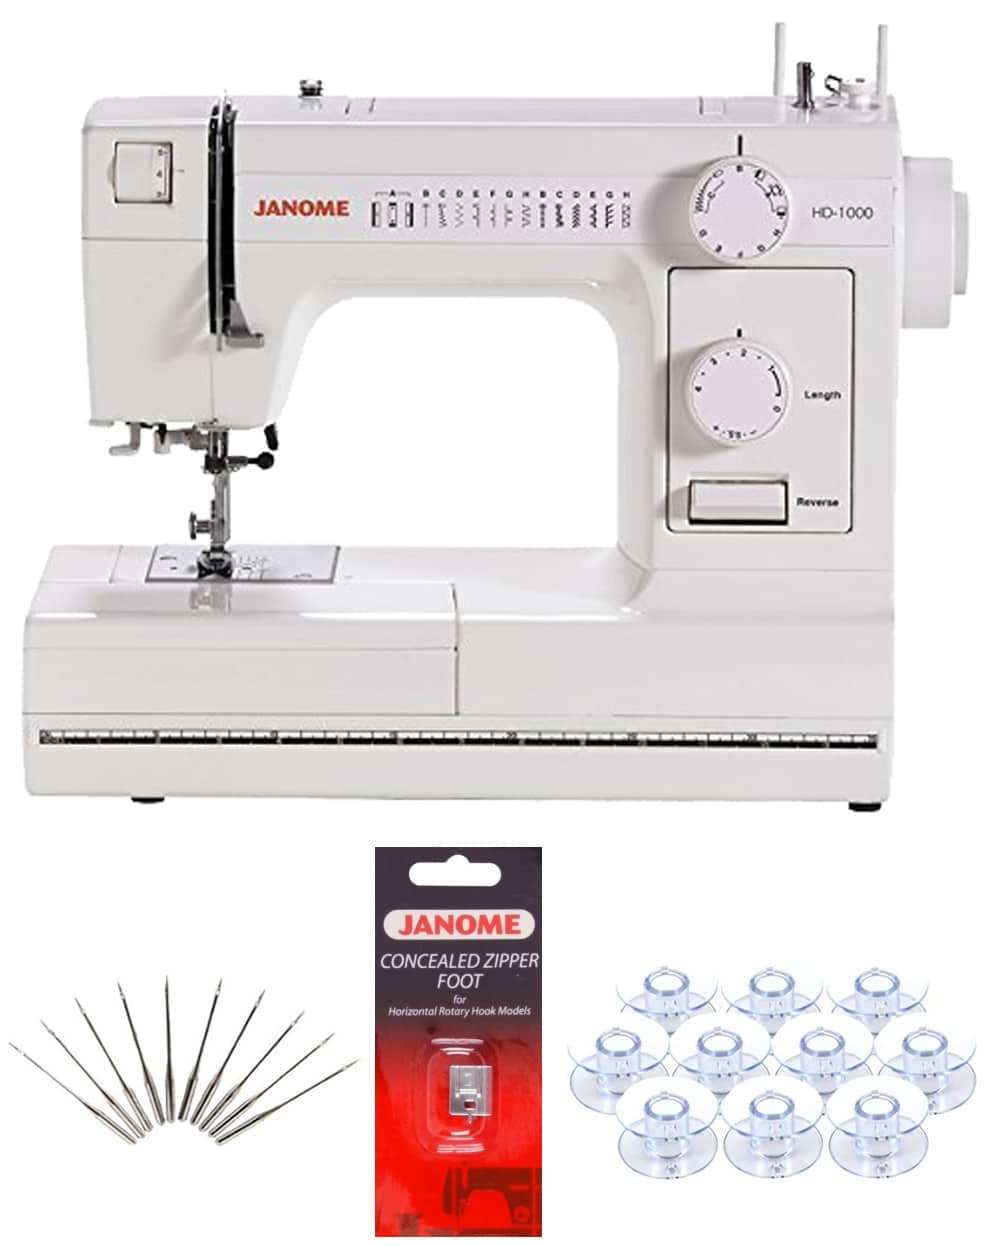 Concealed Zipper Foot - Janome Horizontal Rotary Hook Models